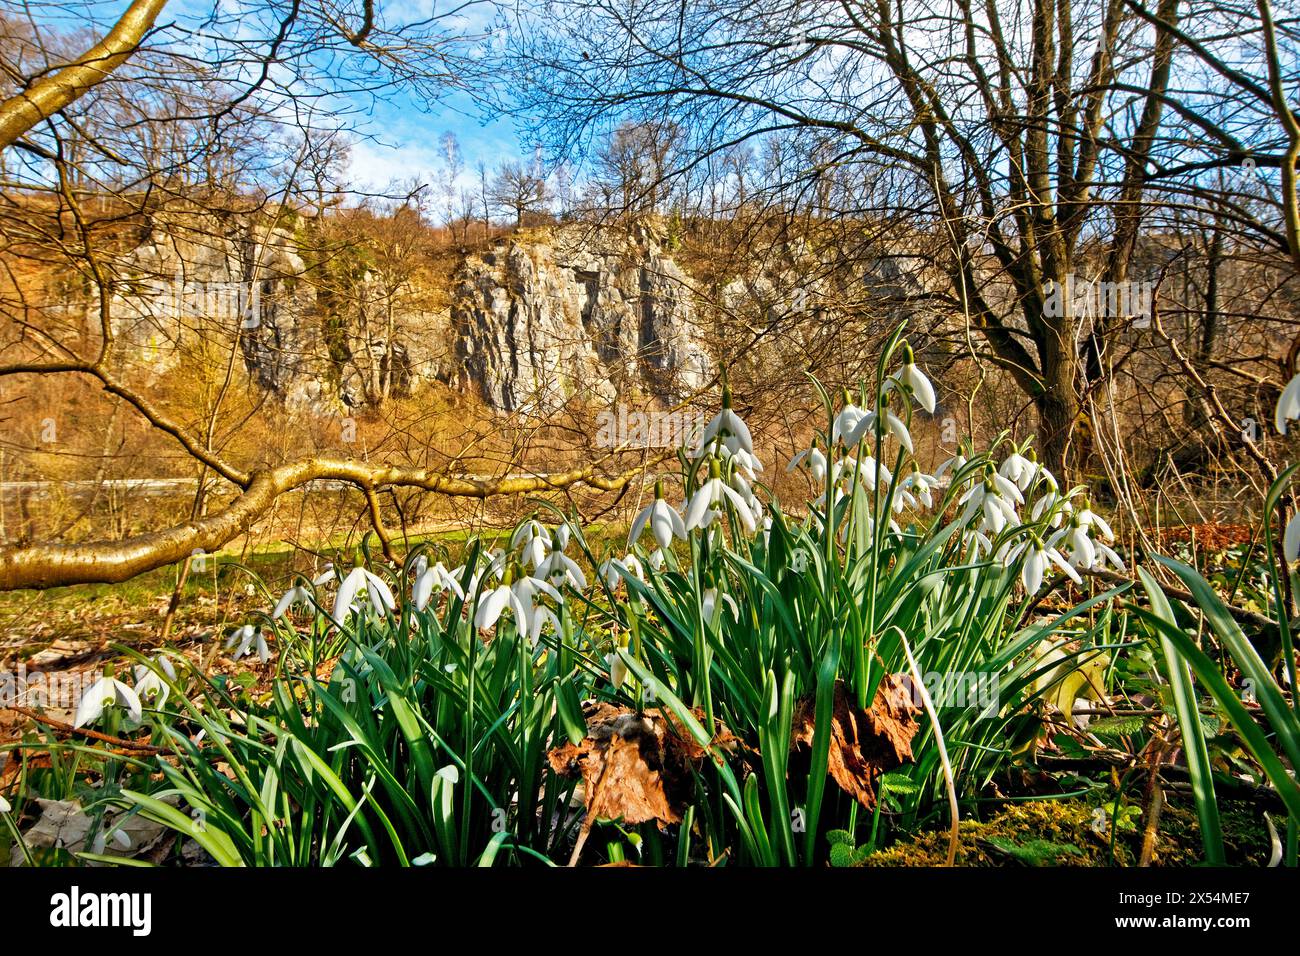 common snowdrop (Galanthus nivalis), blooming snowdrops in front of the rock formation Seven Virgins in spring, Germany, North Rhine-Westphalia, Sauer Stock Photo